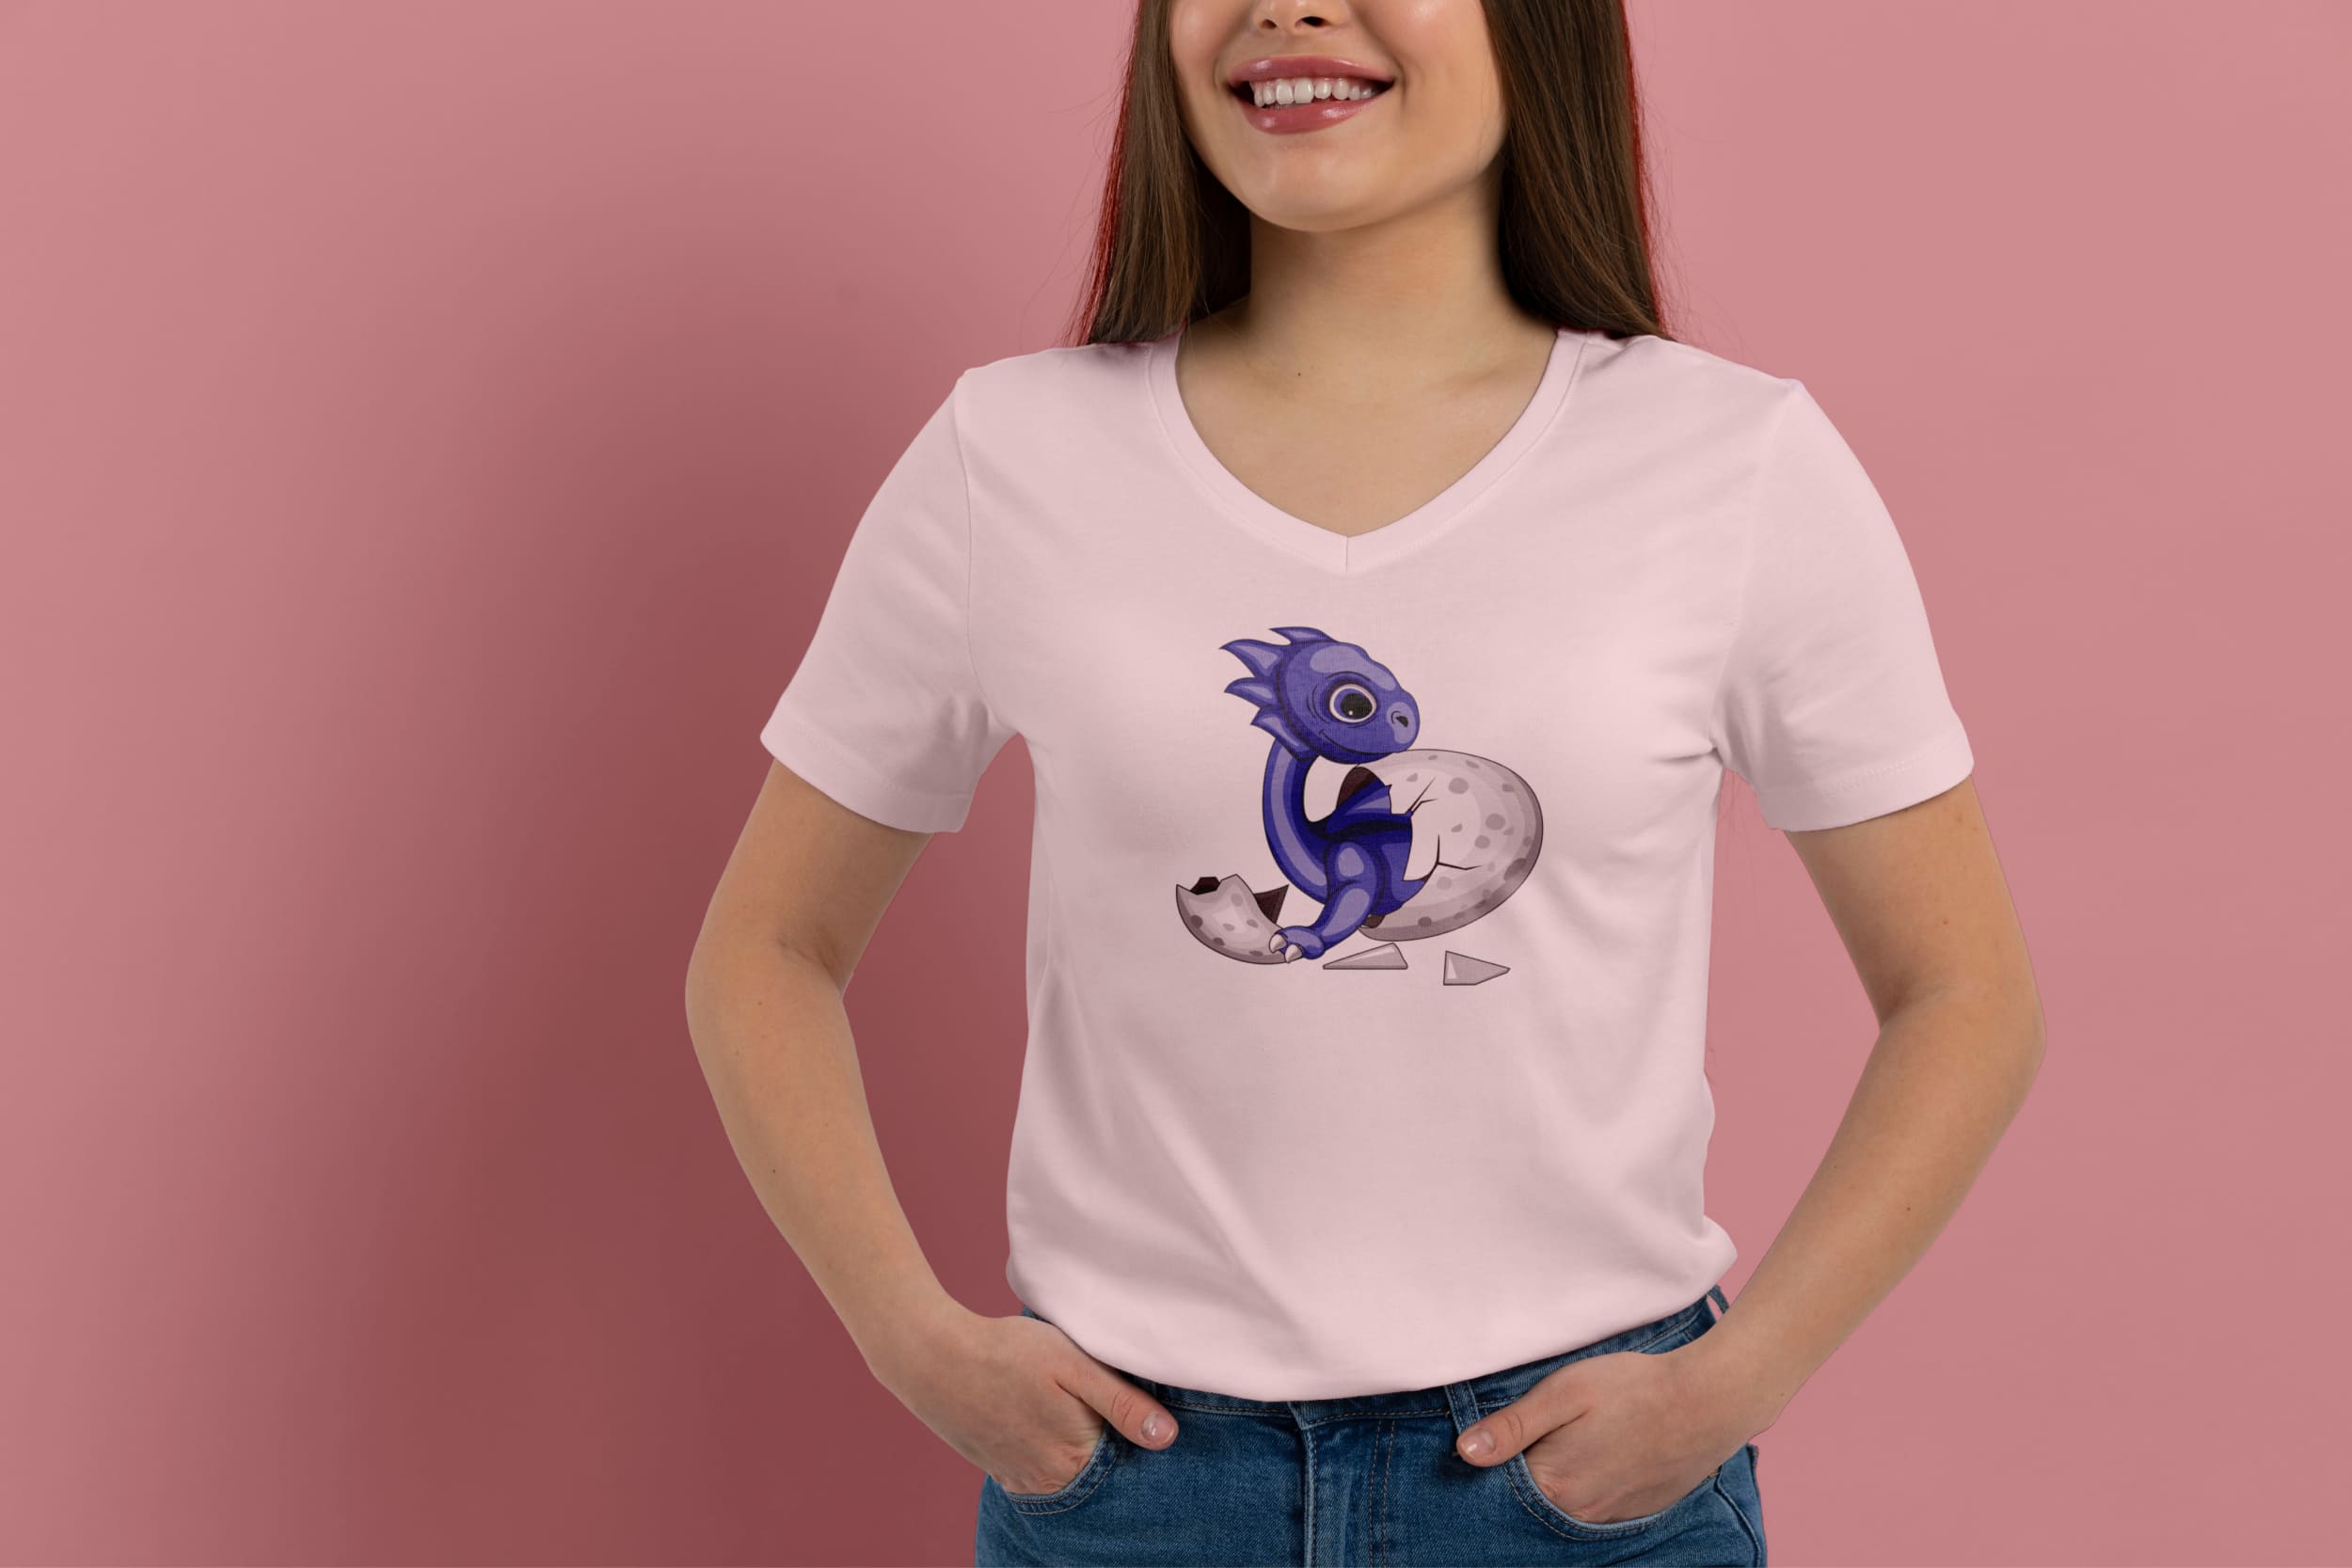 A light pink t-shirt on a girl with a blue dragon hatched from an egg, on a pink background.